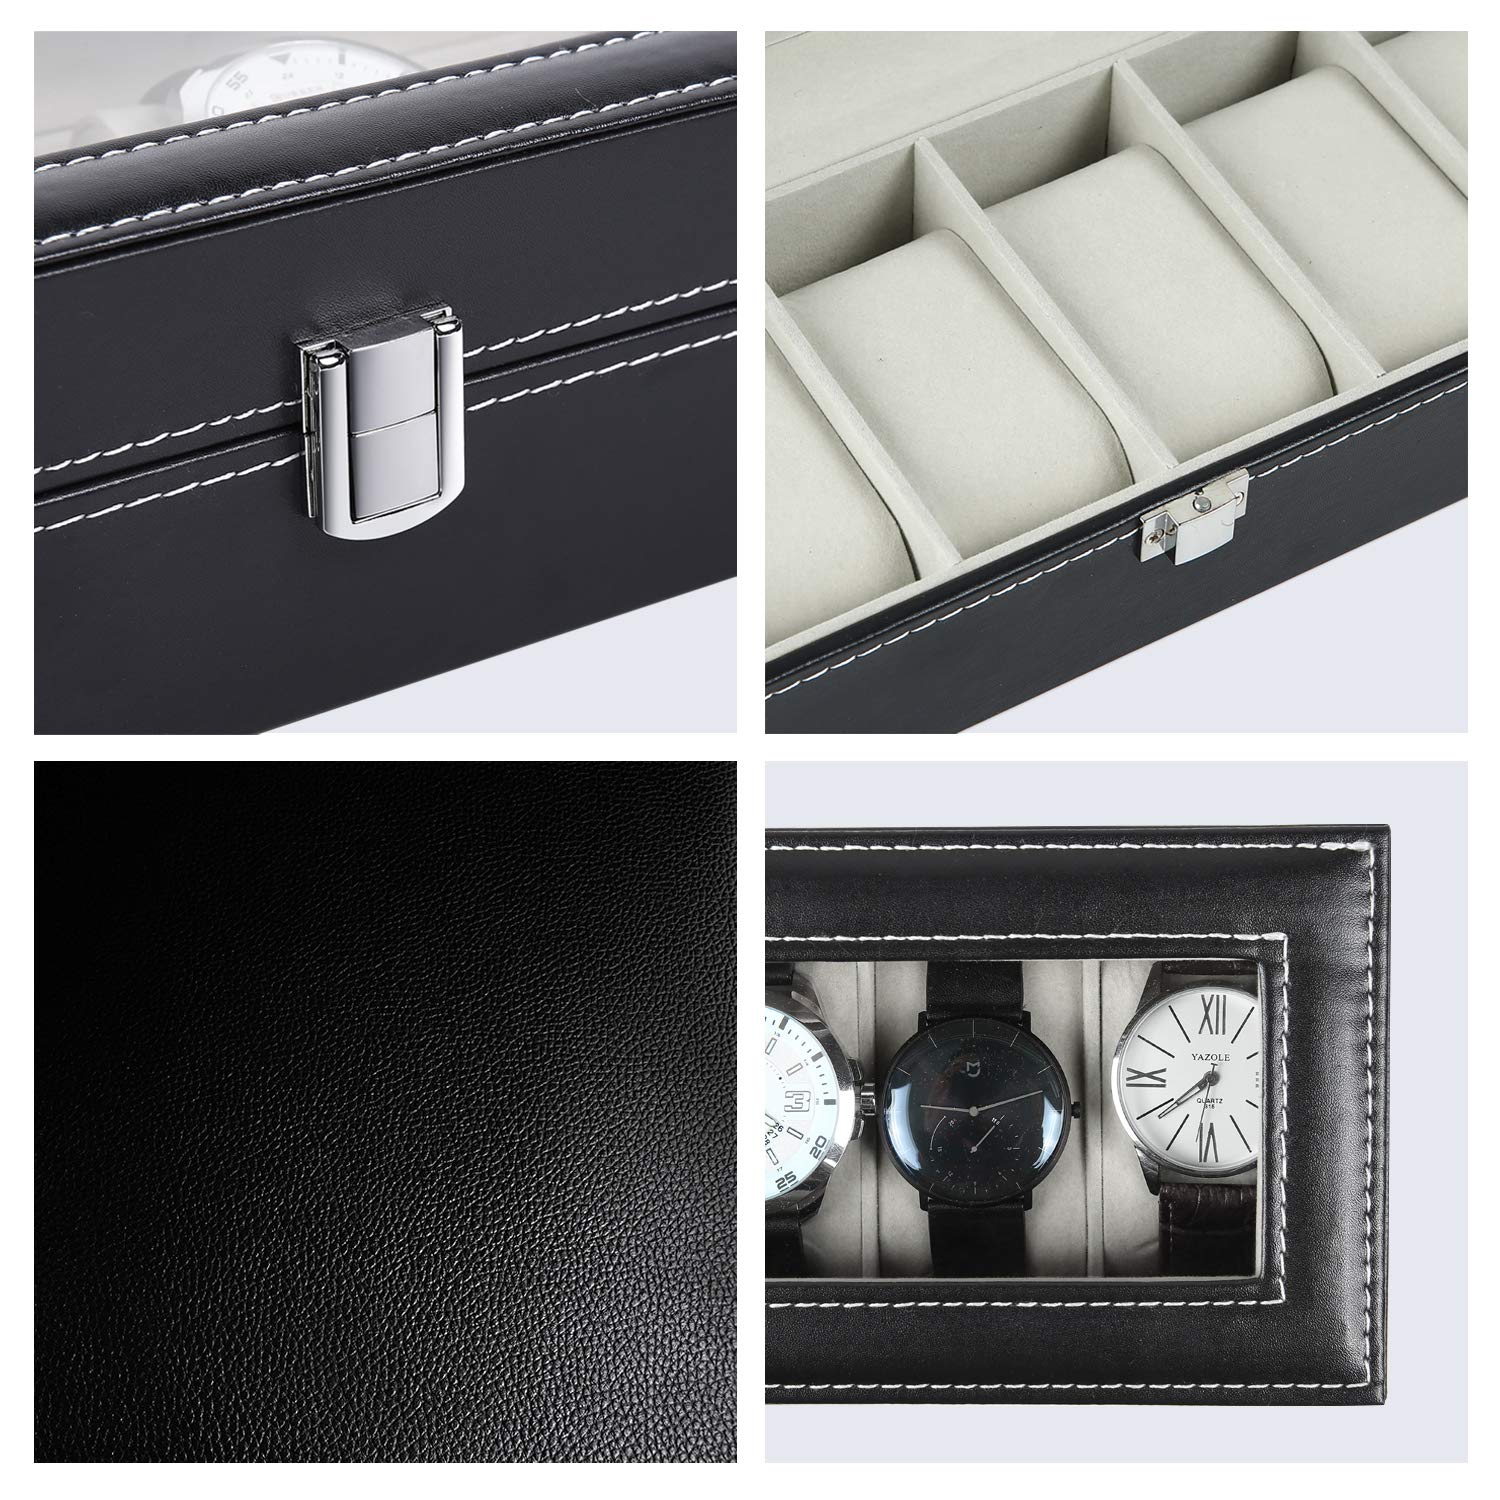 Ohuhu Watch Box Organizer for Men, Watch Case 6 Slot PU Leather Watch Holder Real Glass Lid Jewelry Organizer Storage Soft velvet Watch Display Case for Men and Women Perfect Birthday Gifts